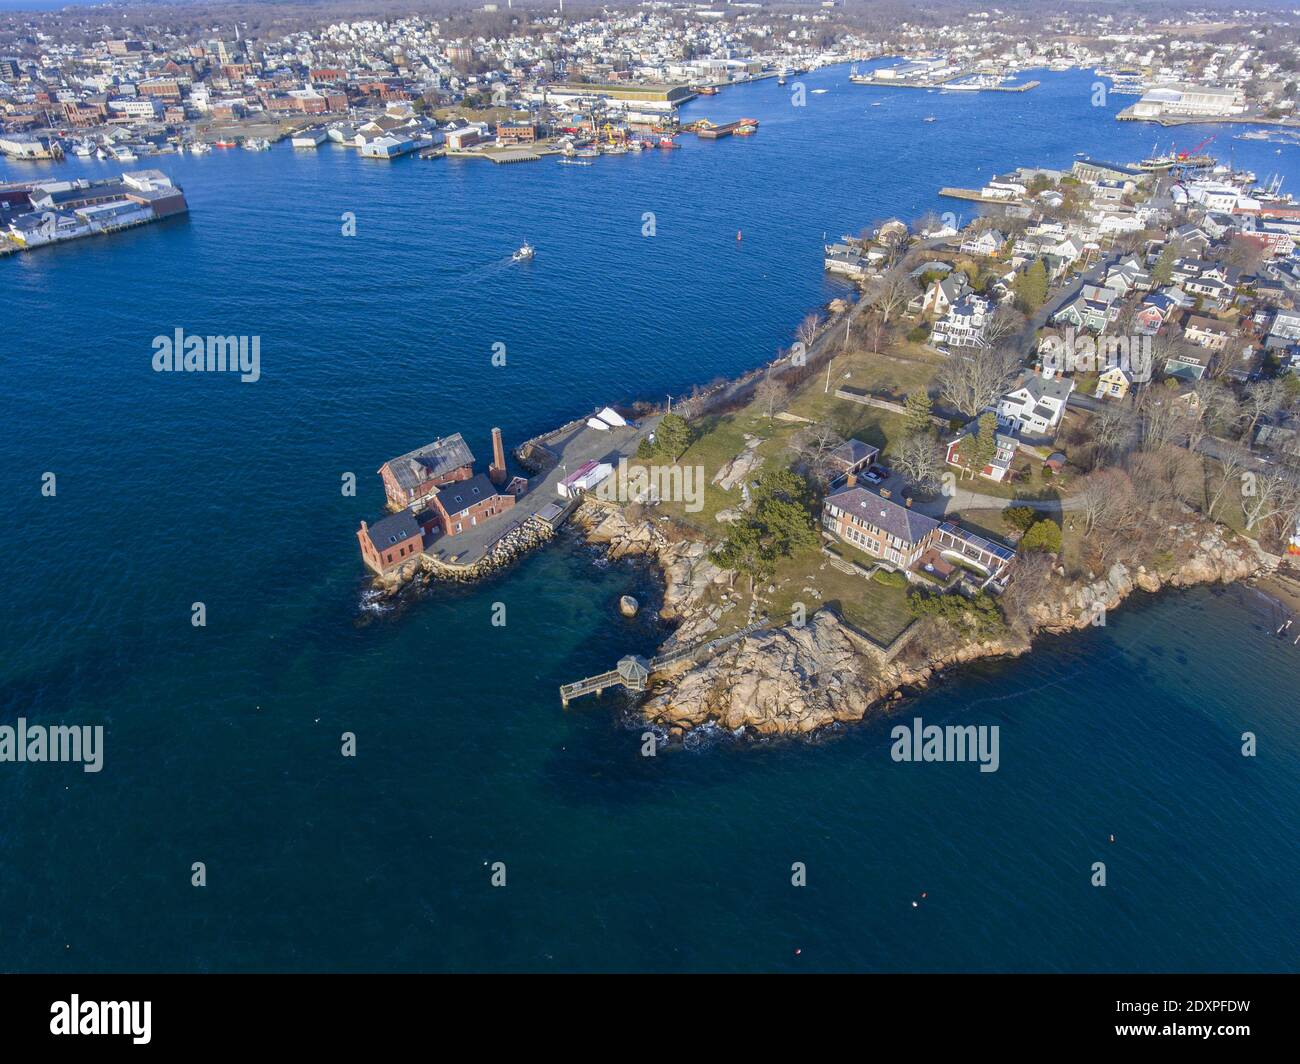 Aerial view of historic Paint Factory in Gloucester Harbor, Cape Ann, Massachusetts, USA. Stock Photo